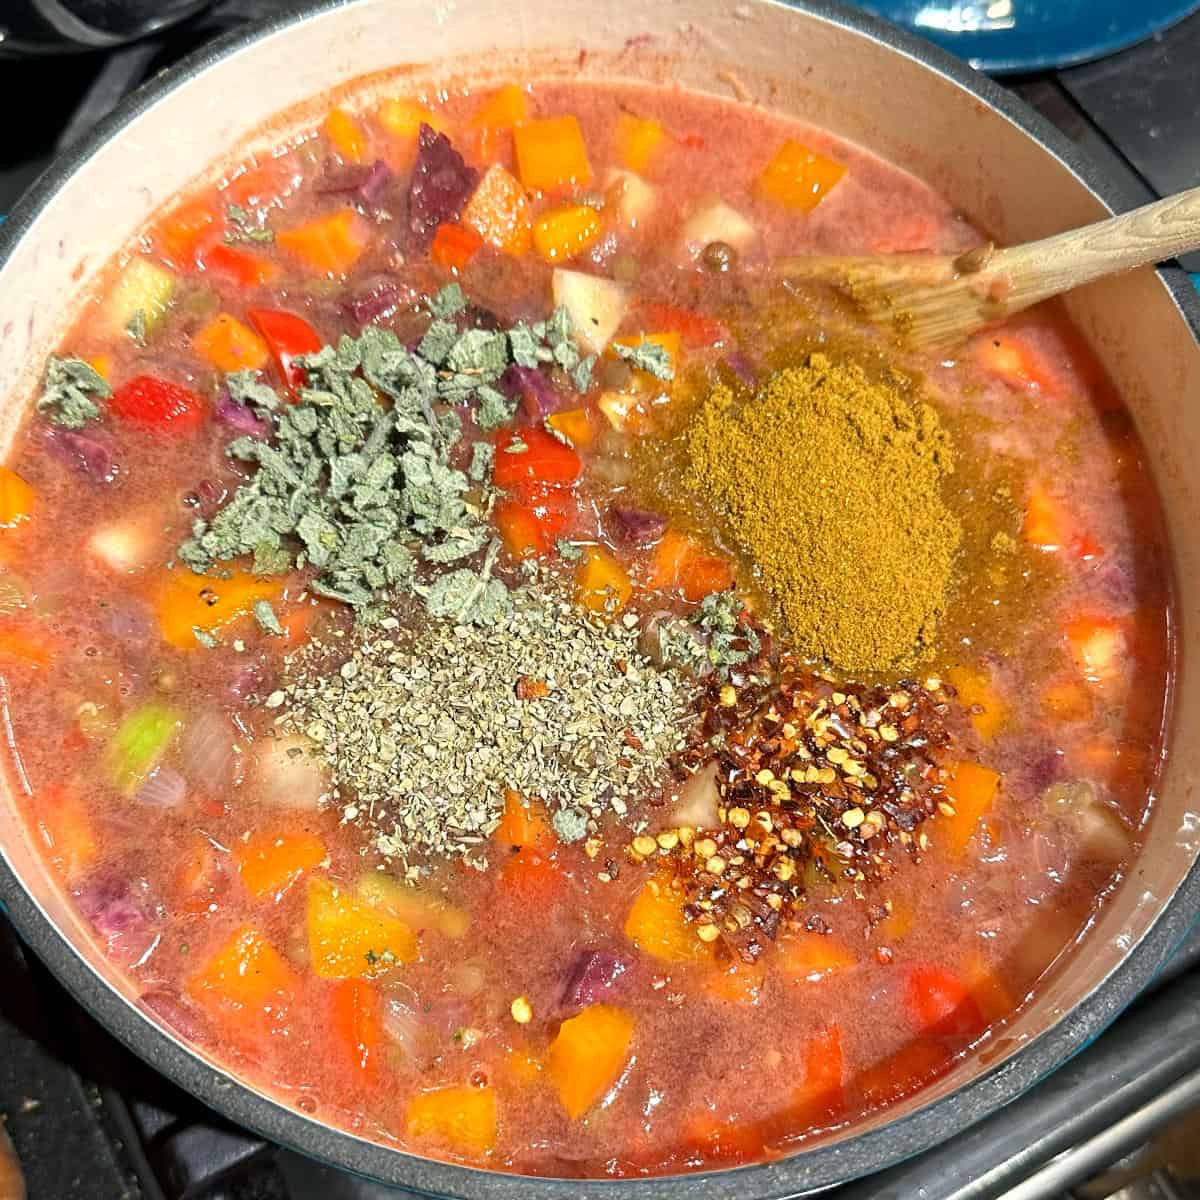 Spices and herbs added to stew in Dutch oven.